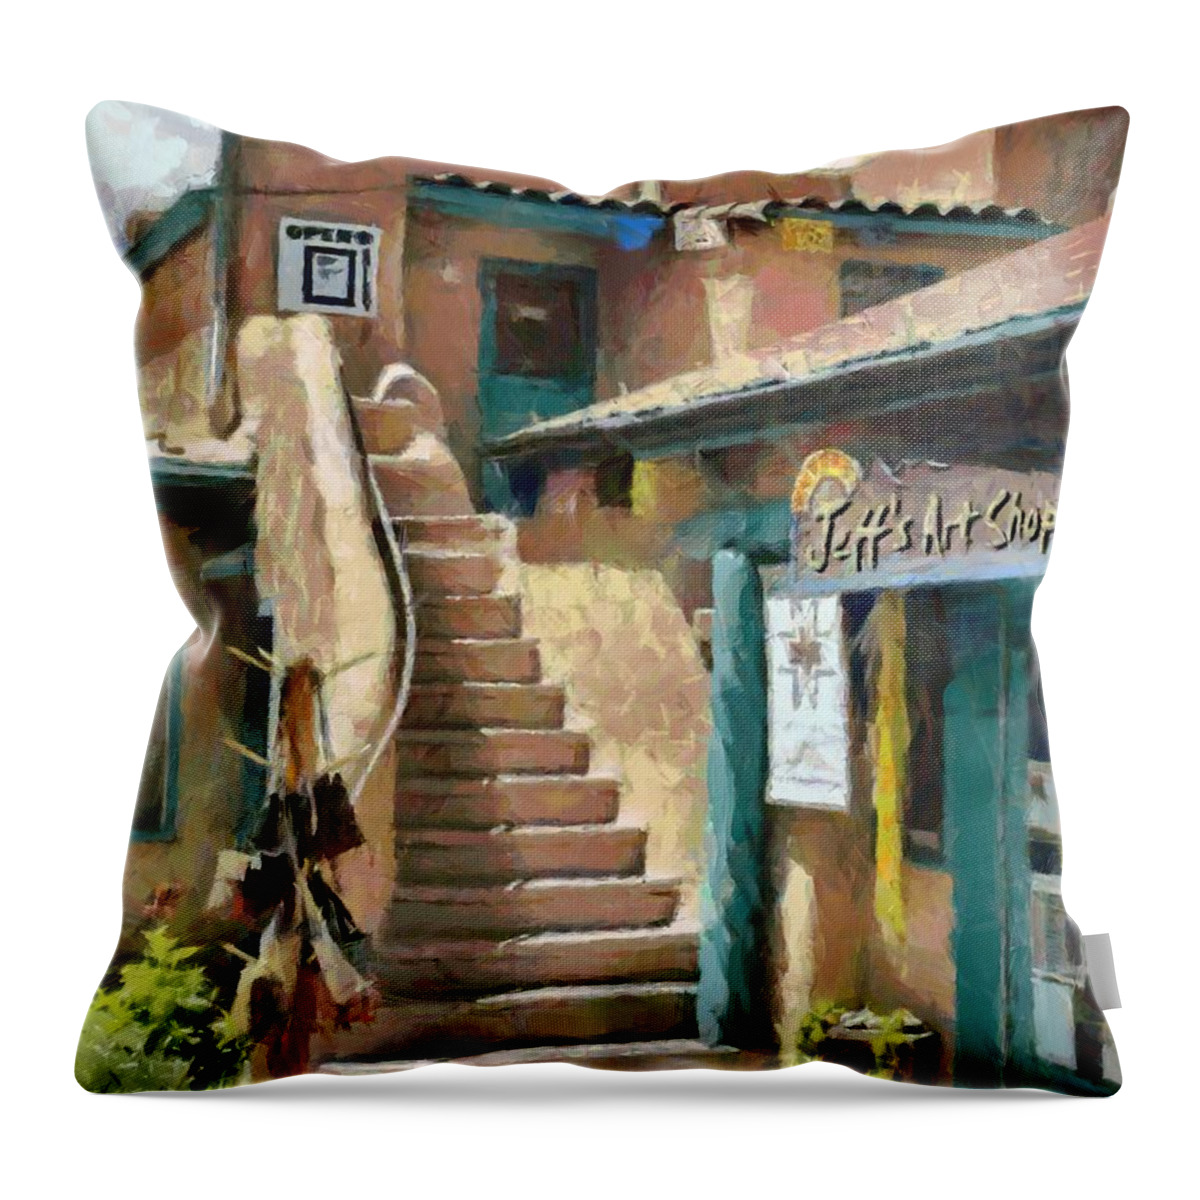 Jeff's Art Shop Throw Pillow featuring the painting Open for Business by Jeffrey Kolker